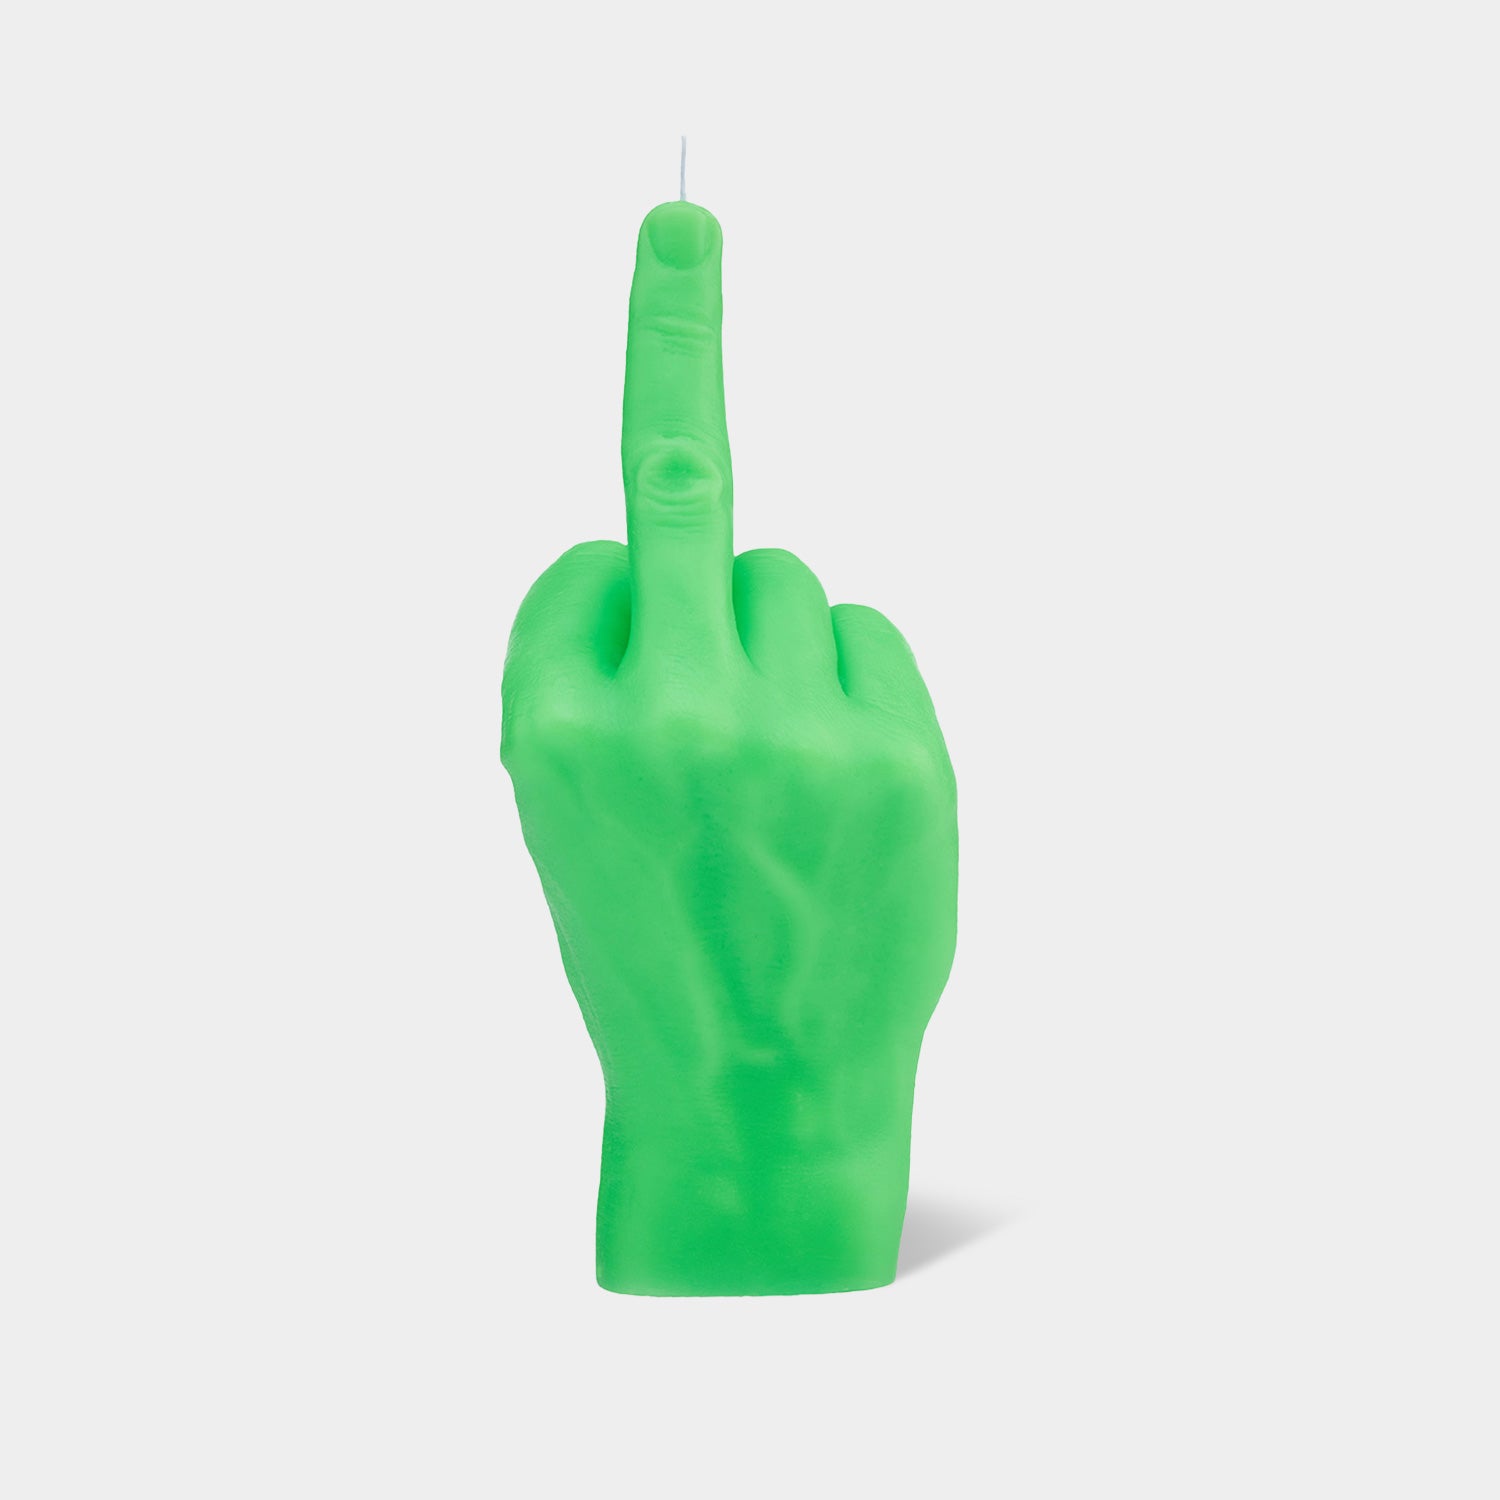 CandleHand "Fcuk You" Candle - Neon Green